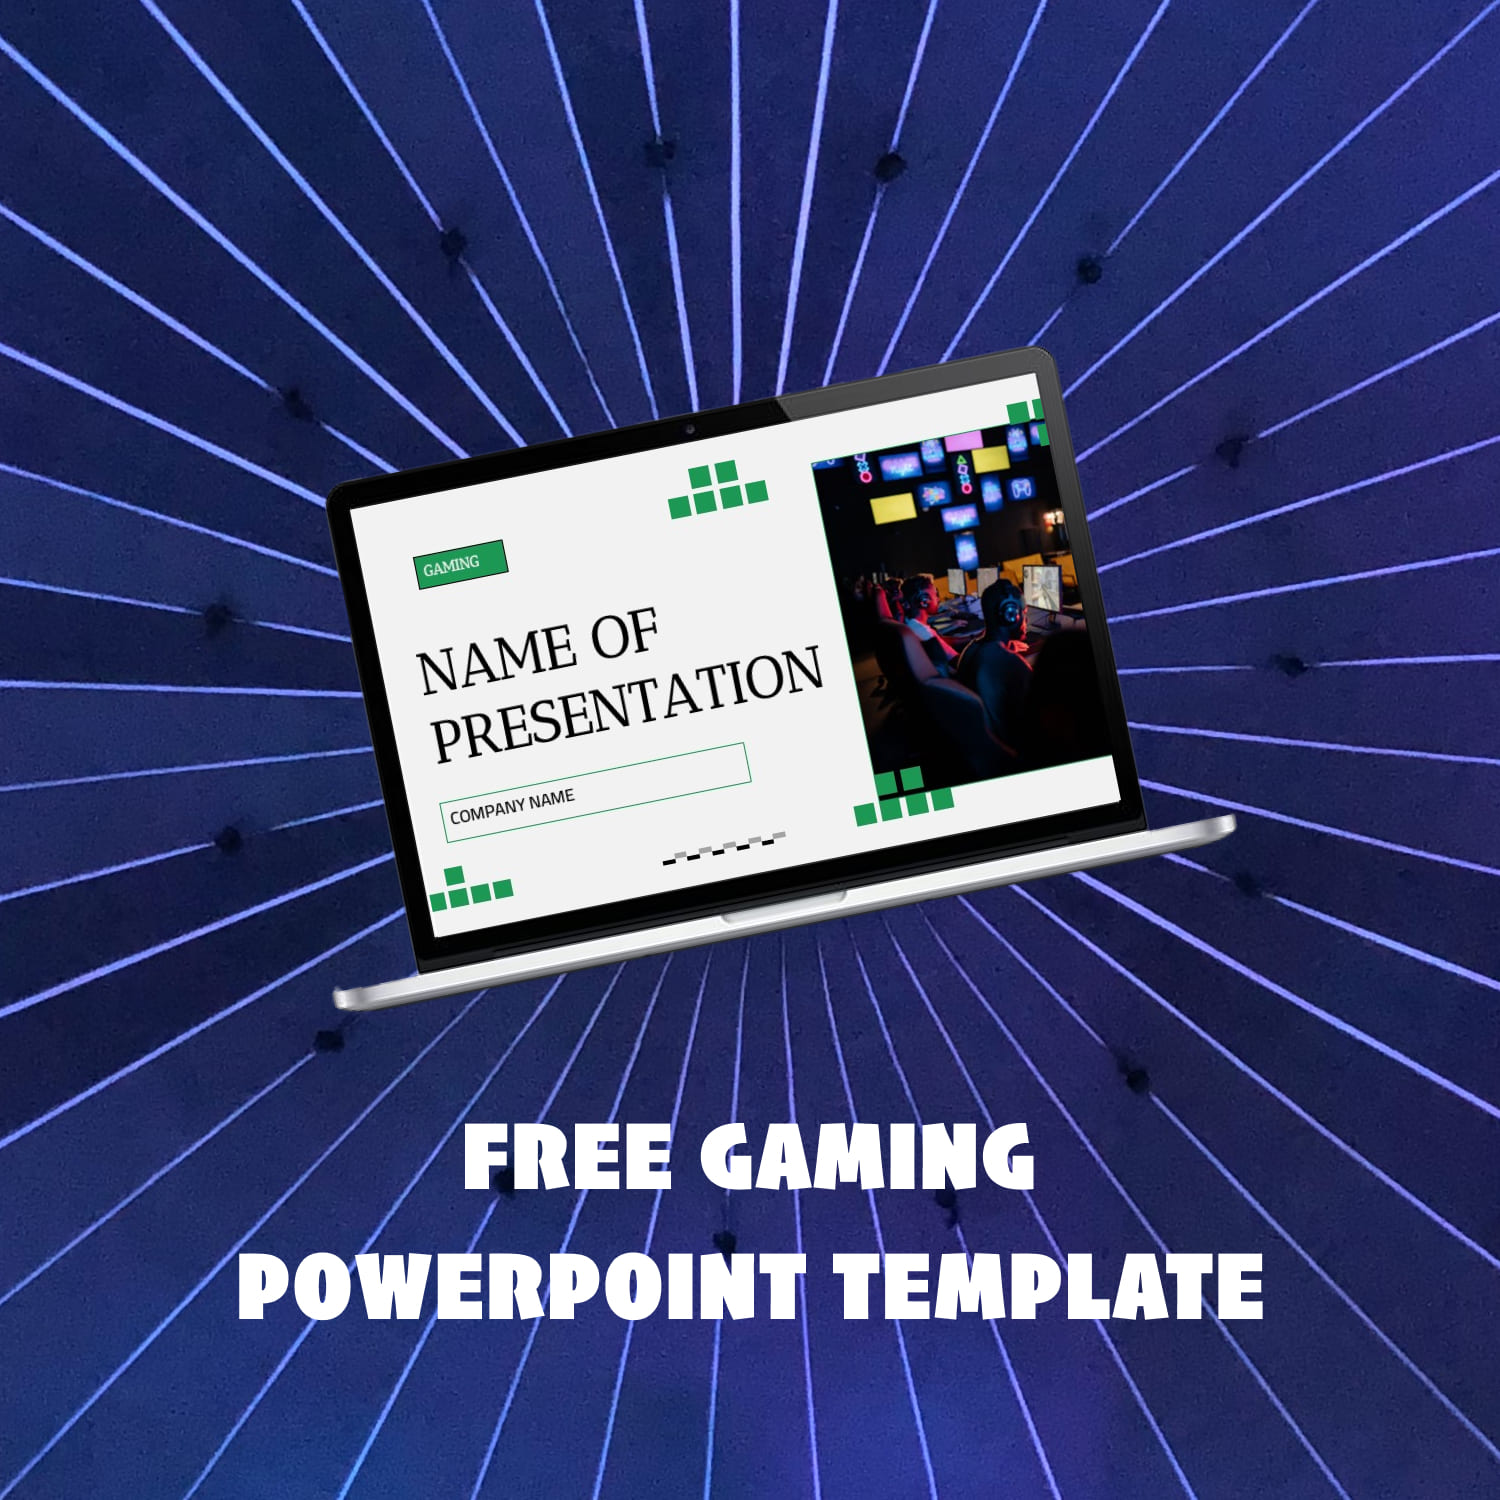 Free gaming powerpoint template - main image preview.